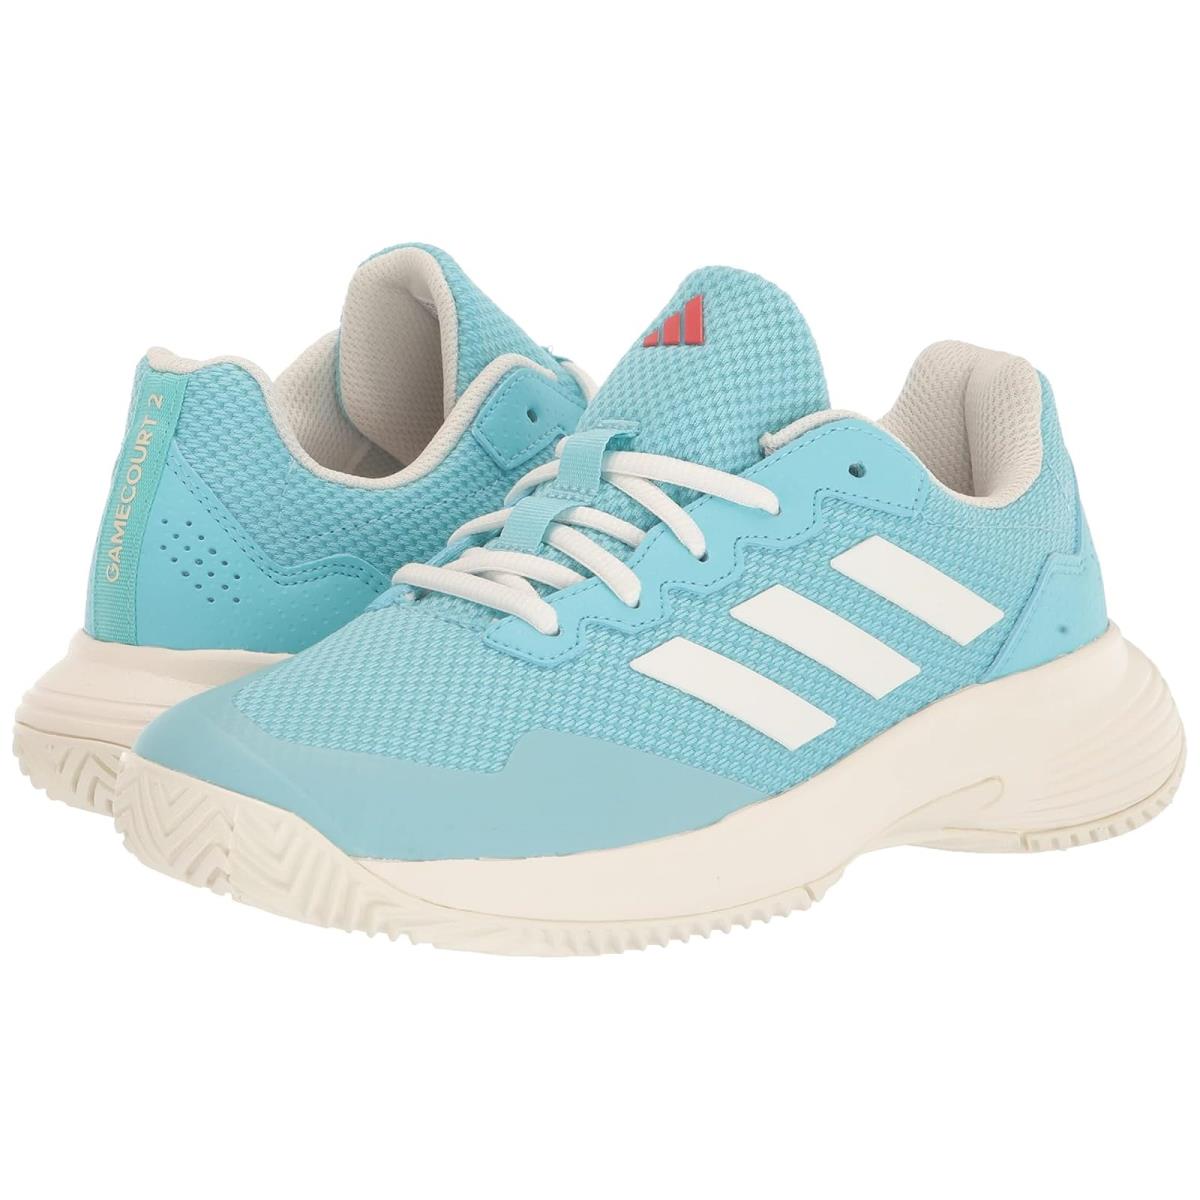 Woman`s Sneakers Athletic Shoes Adidas Game Court 2 Light Aqua/Off-White/Bright Red